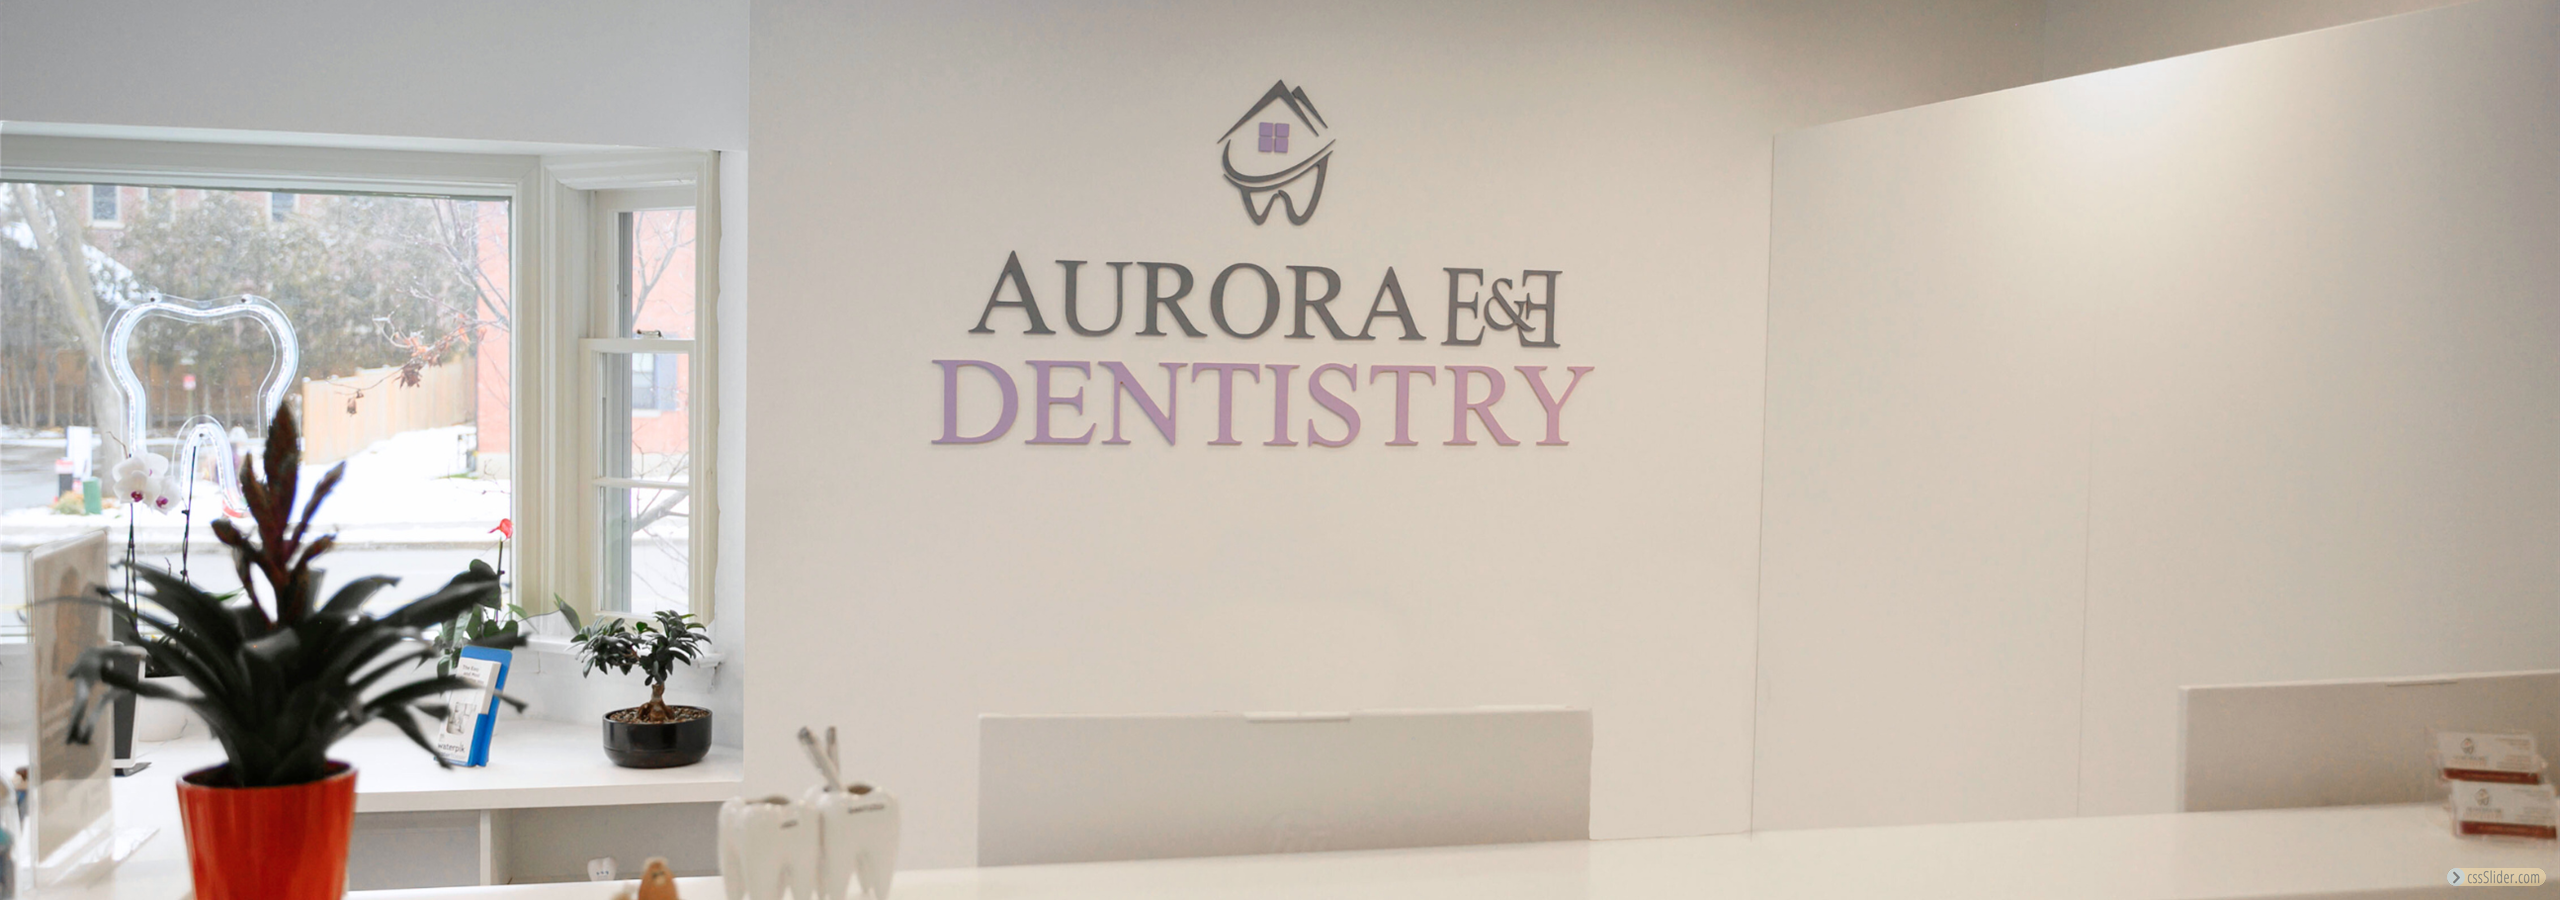 Welcome to Aurora E&E Dentistry! We are accepting new patients